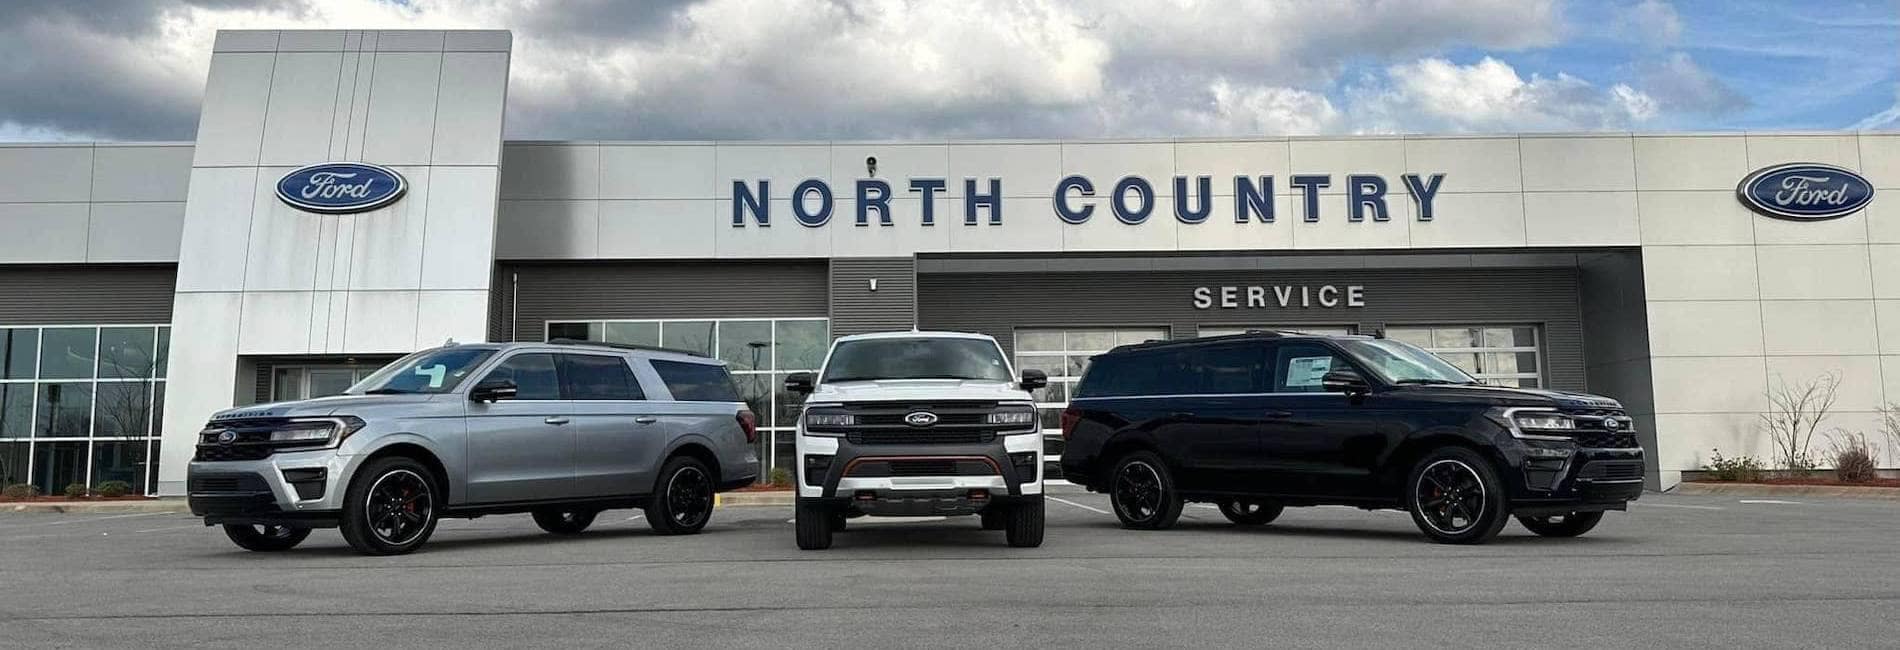 North Country Ford